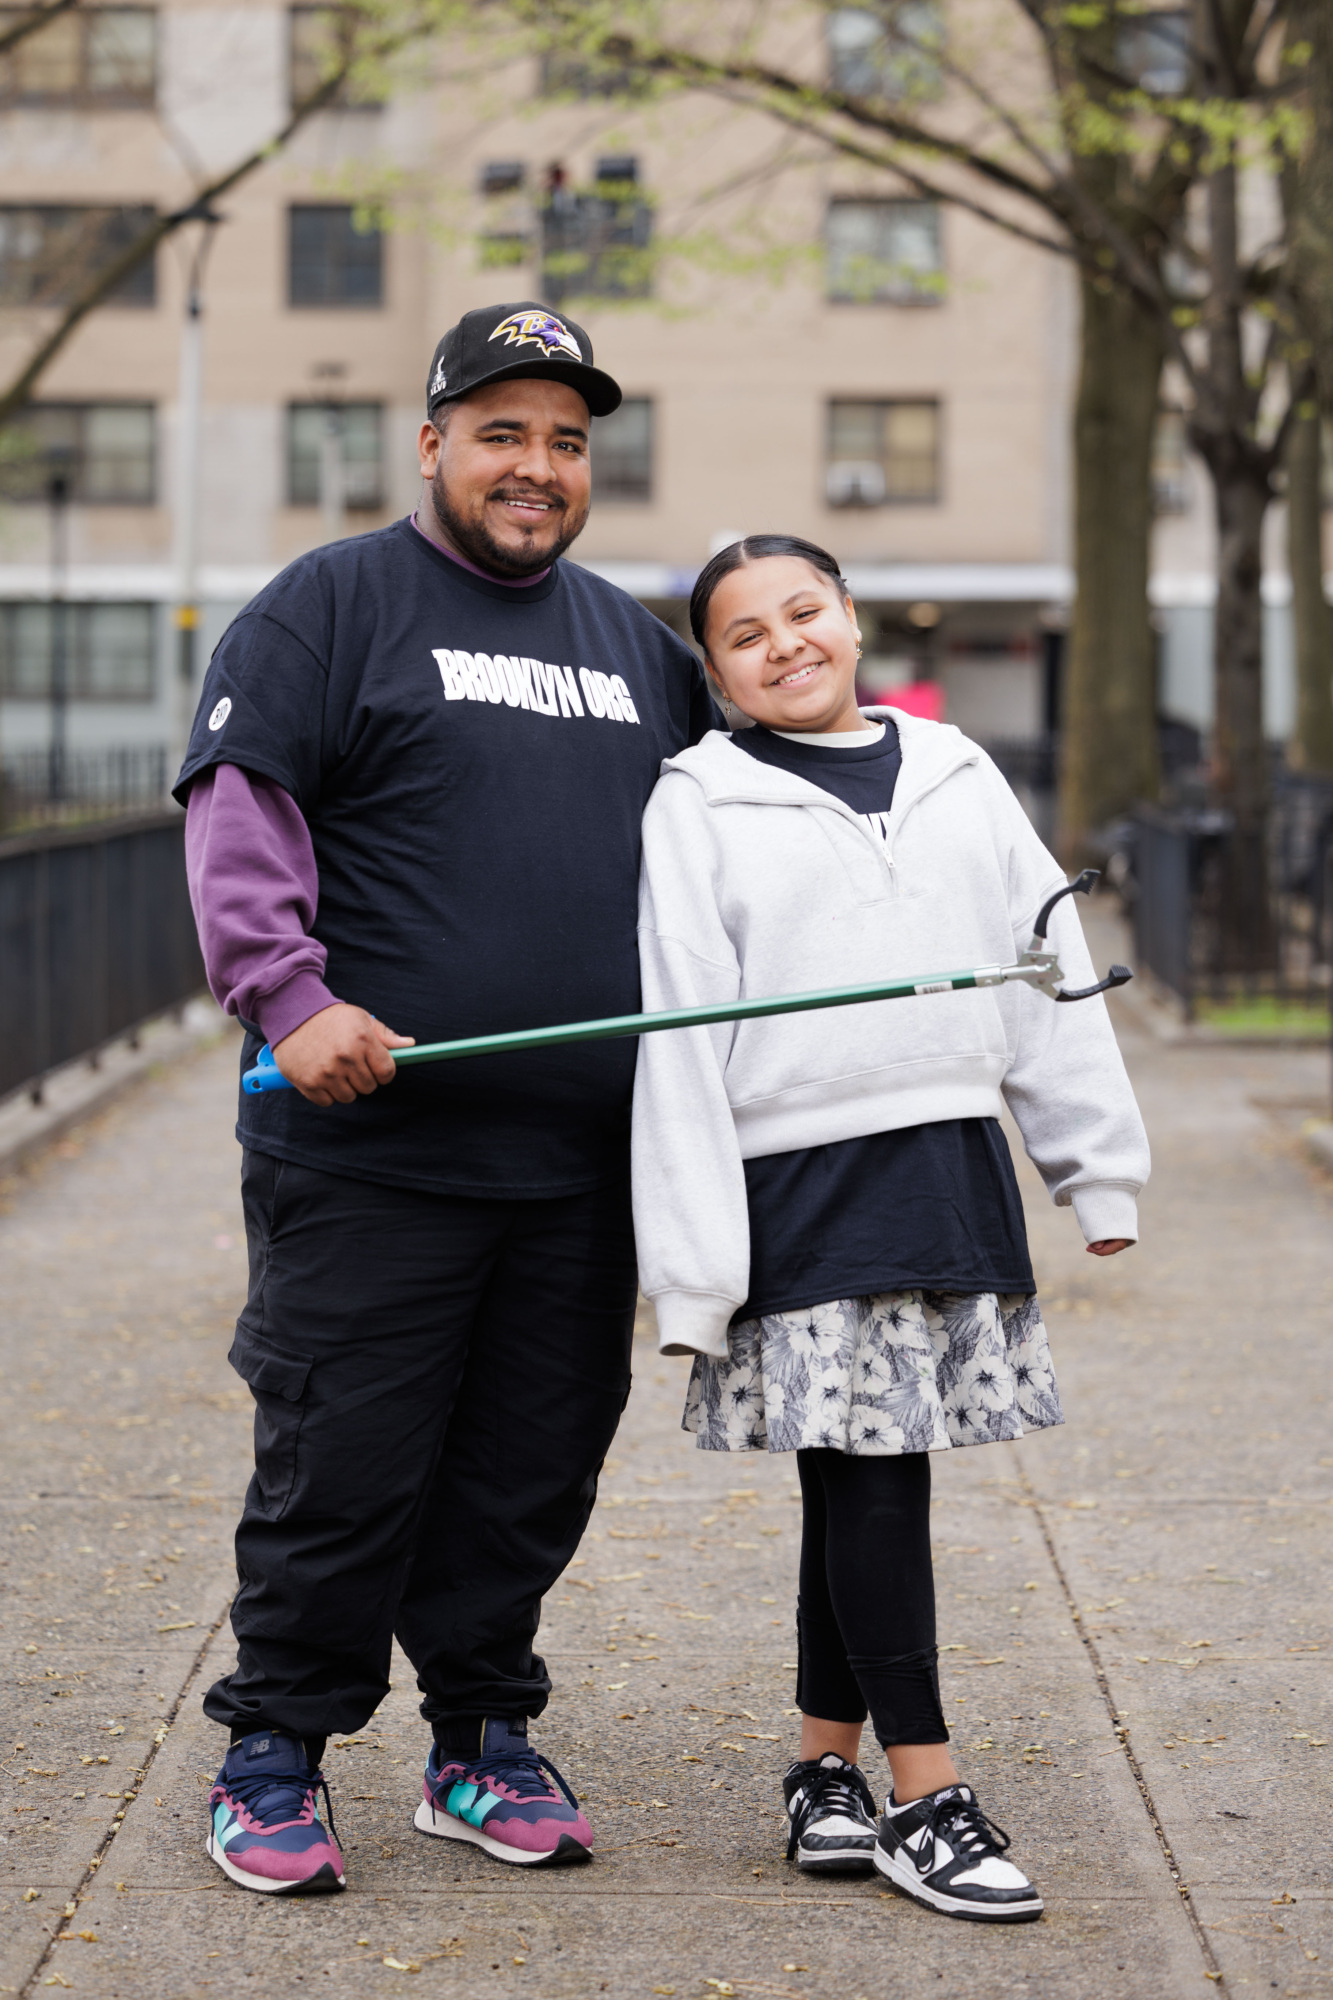 A man and a young girl standing together in a park, smiling at the camera, with the man holding a green stick.